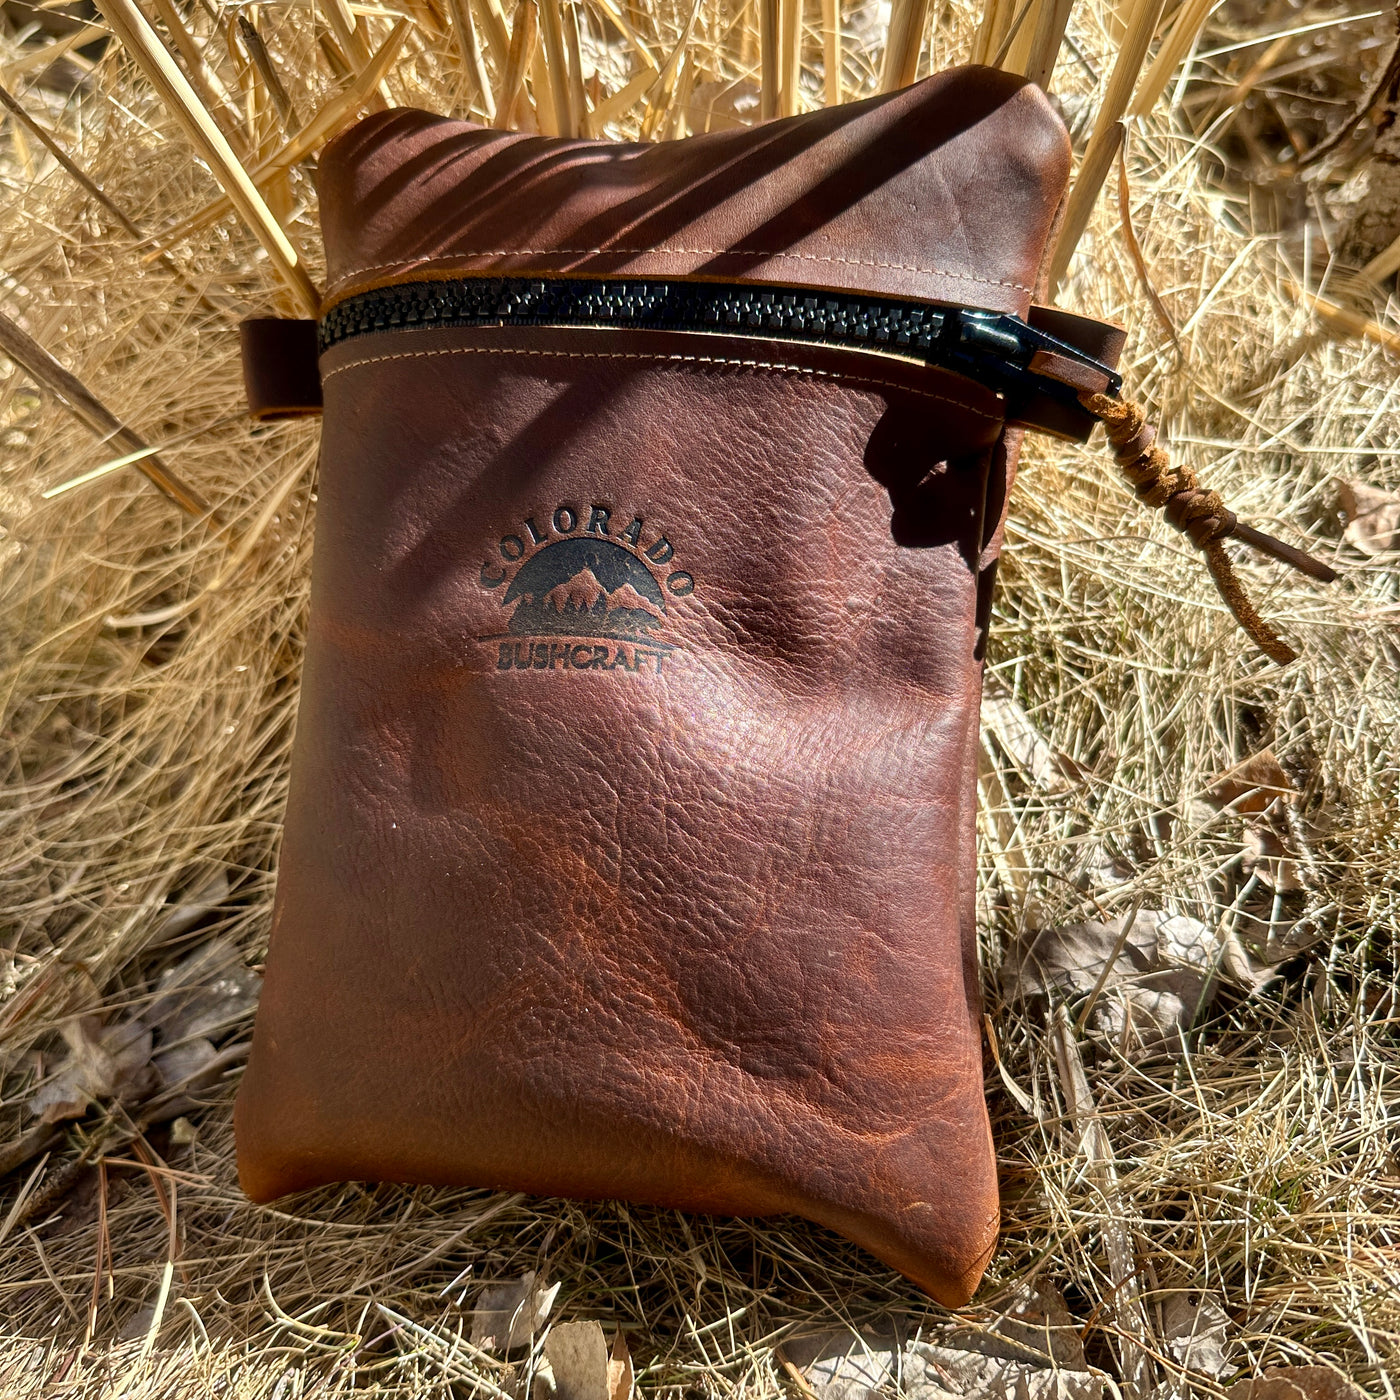 Kodiak Leather Traditional Large EDC Pouch Bushcraft Survival Camping Possibles Dopp Grooming